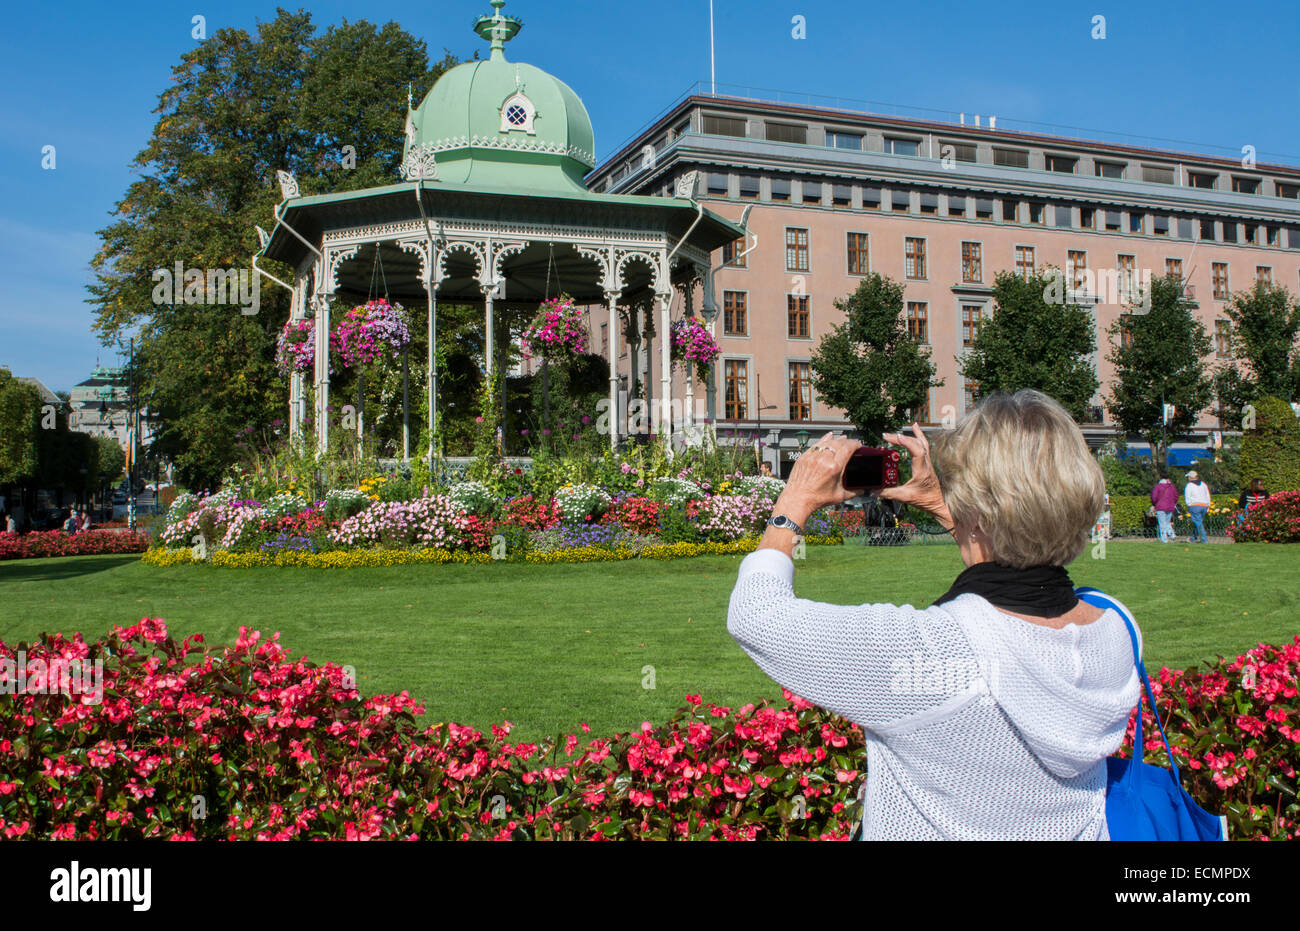 Bergen Norway music Pavillion colorful gazebo with flowers with woman tourist taking cell phone photo in downtown Stock Photo